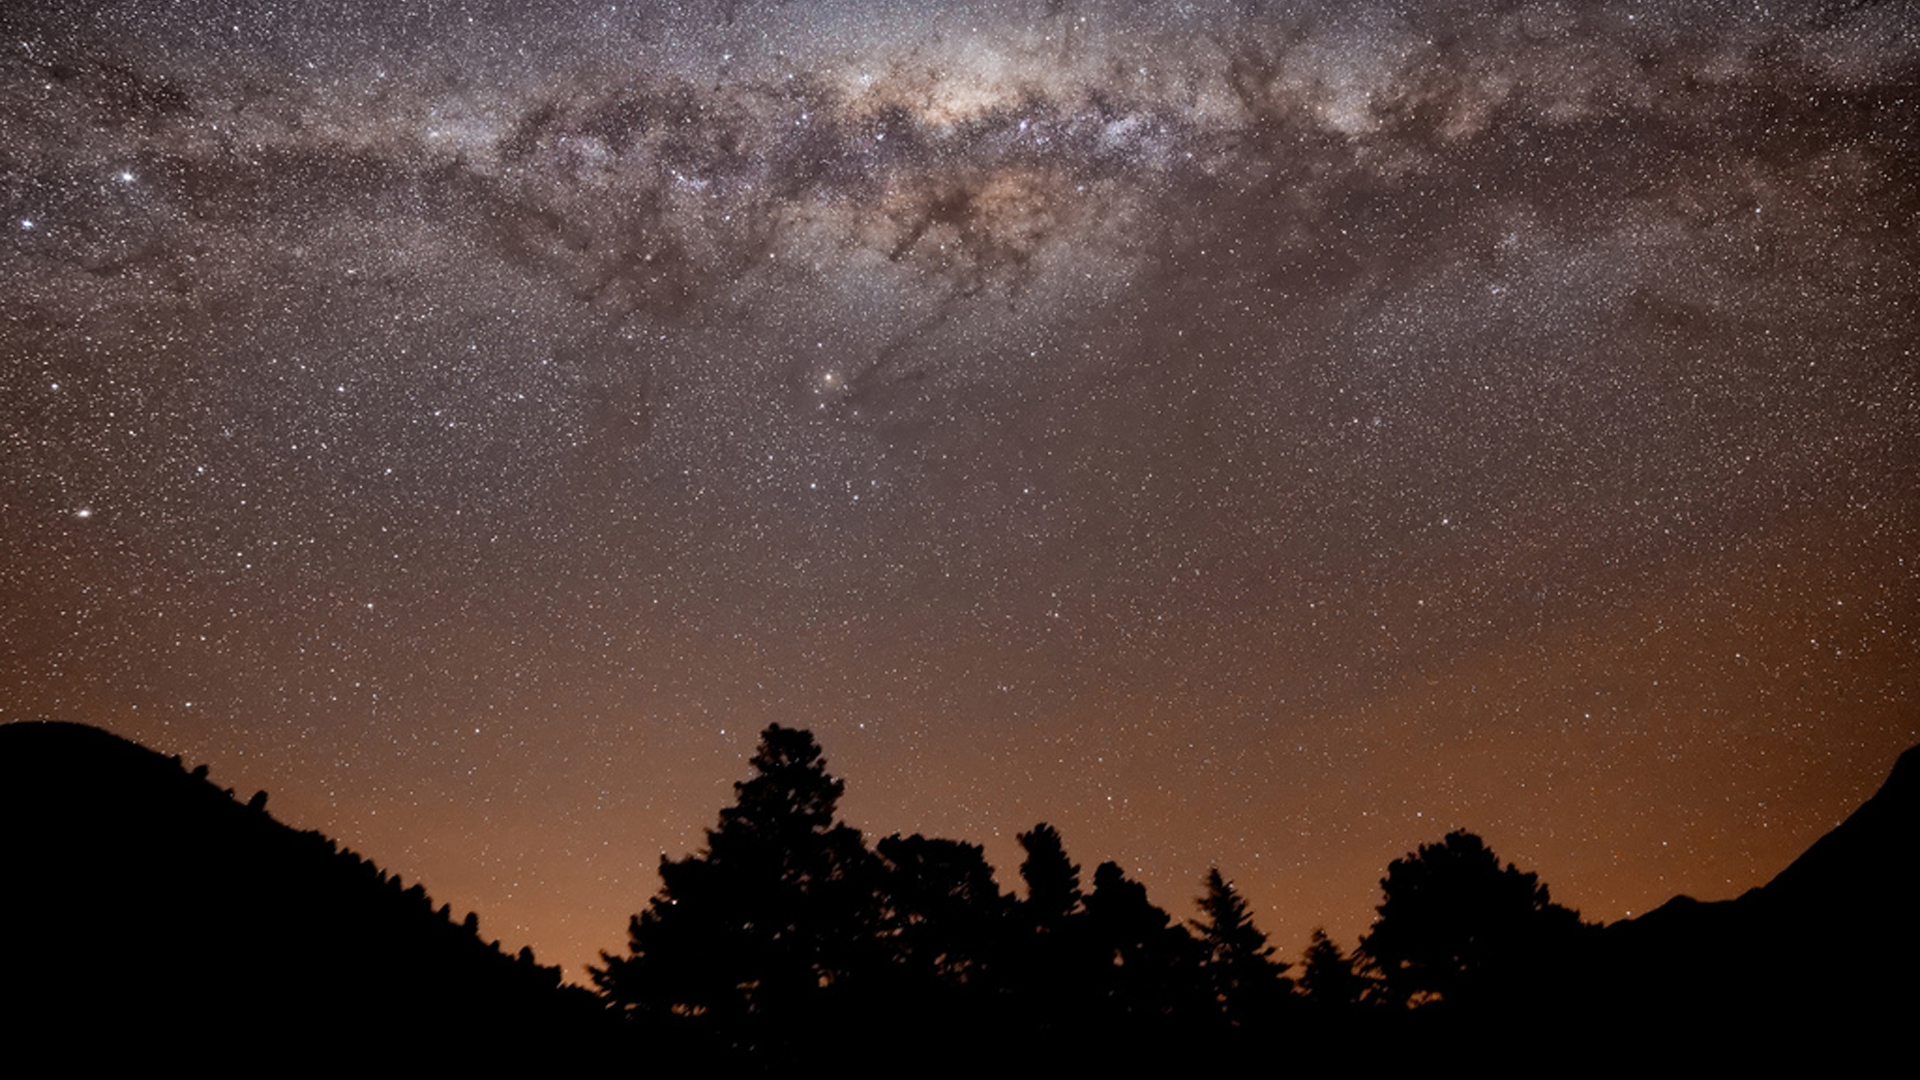 Trees Shadown Under Luminous Stars With Dirty Clouds HD Galaxy